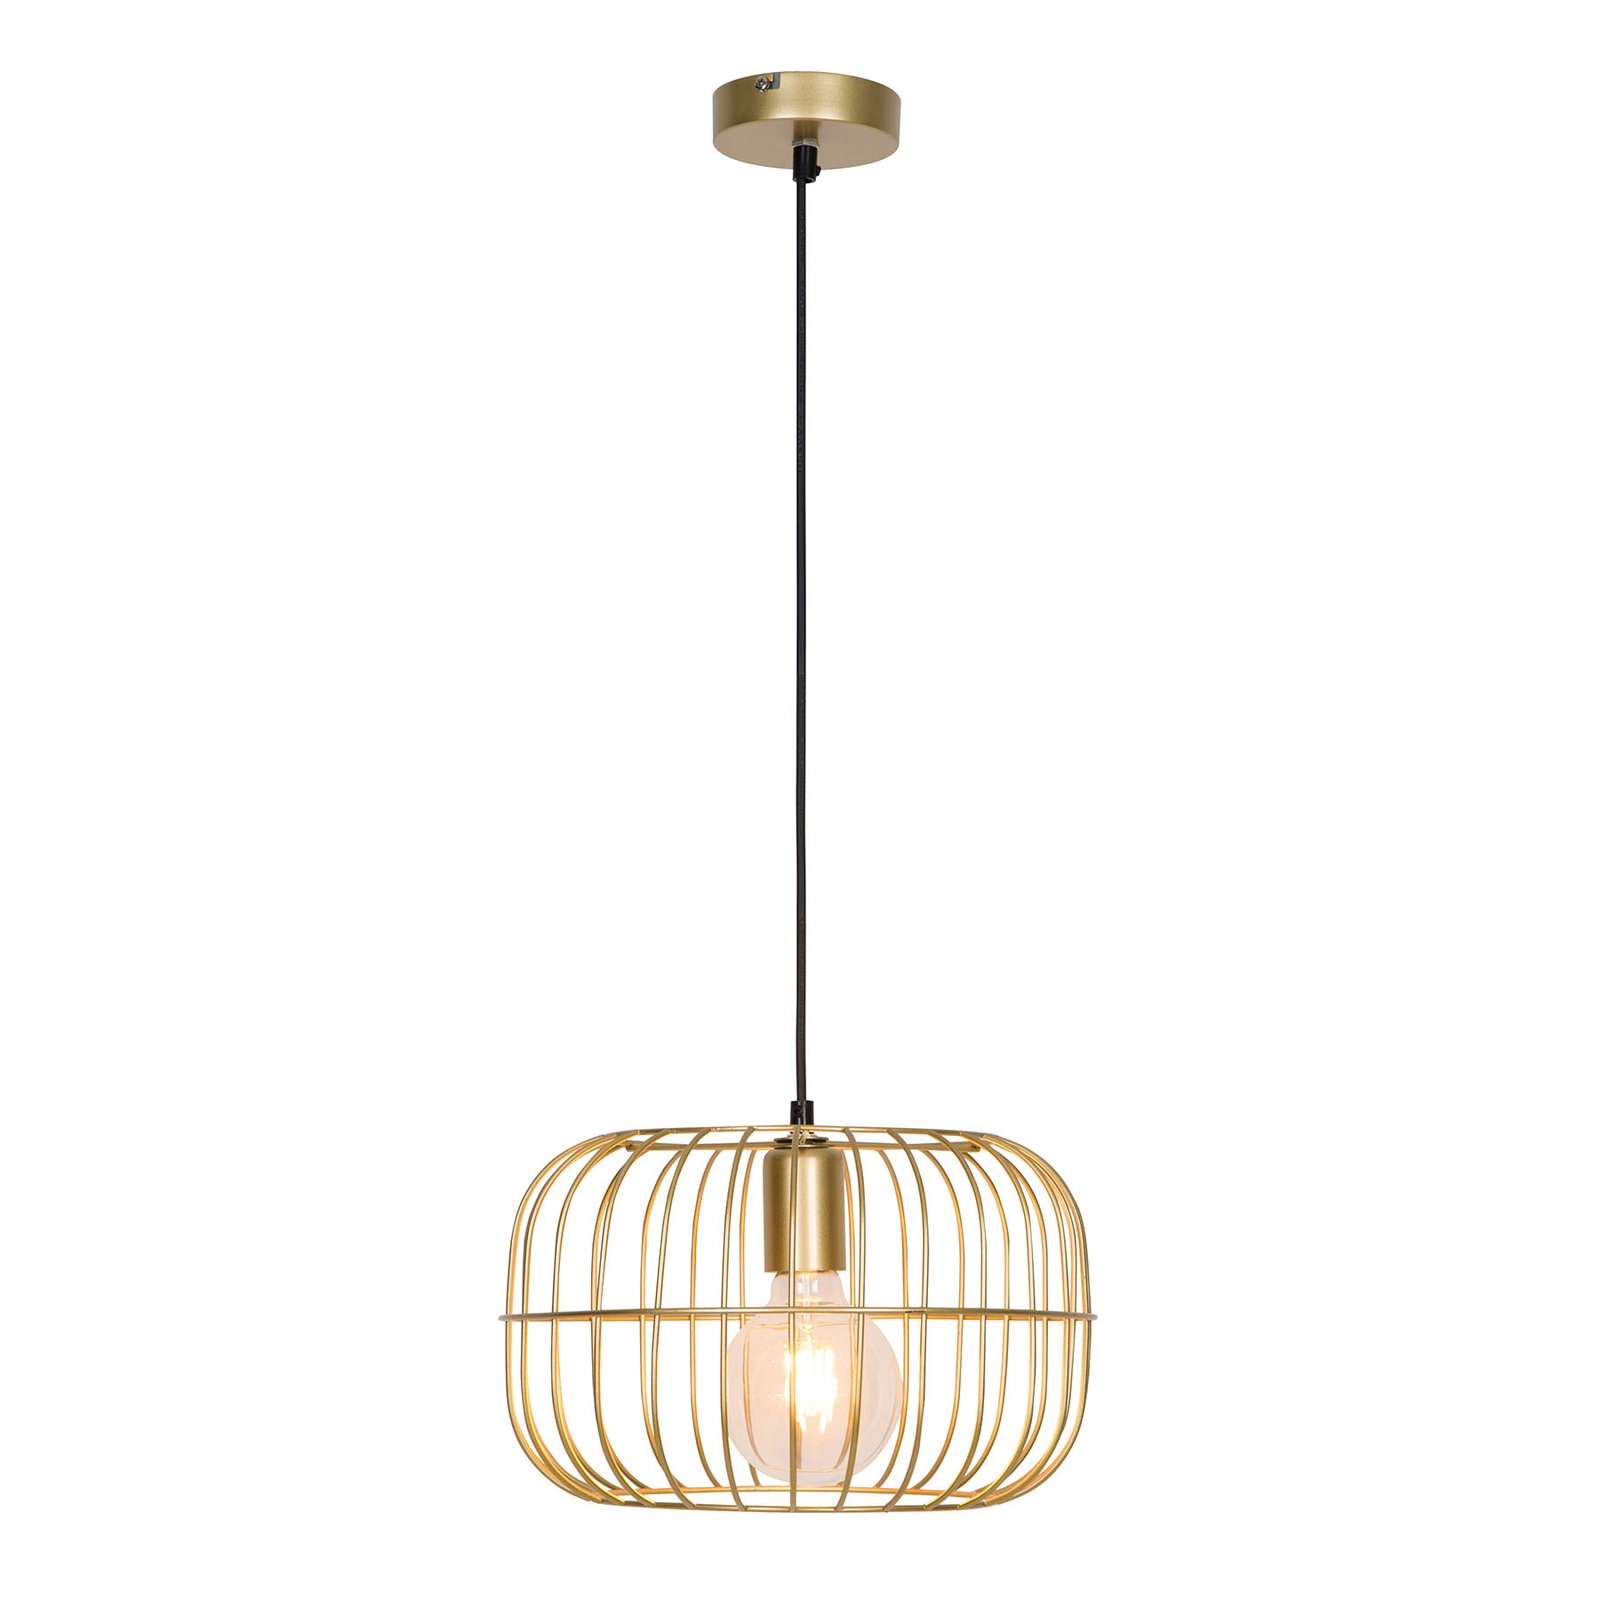 Cage hanging light Zenith, gold